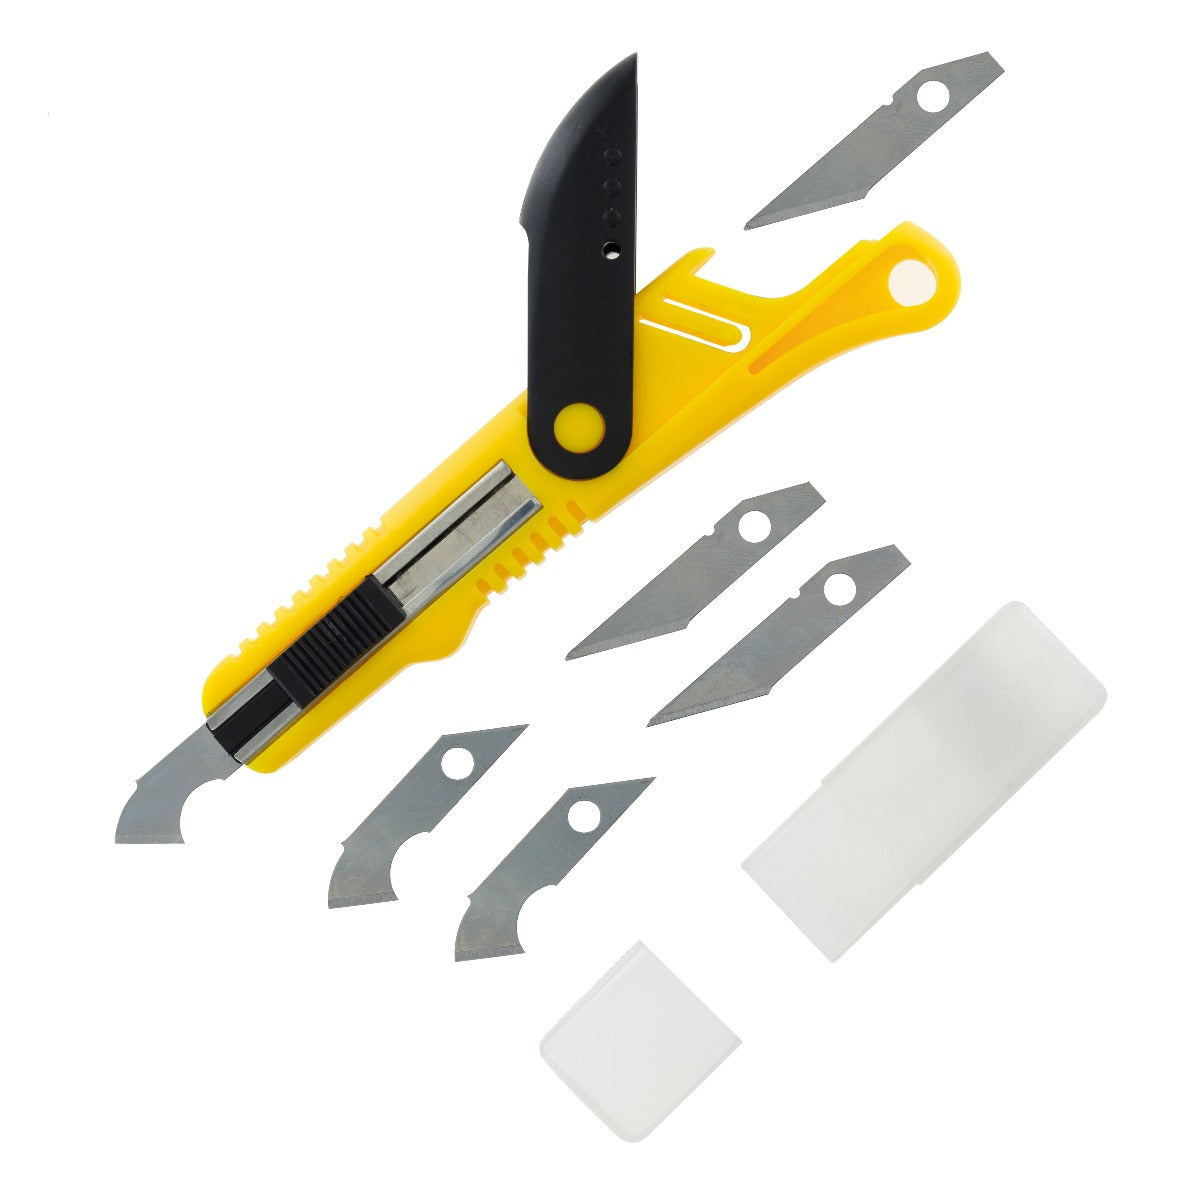 Vallejo Hobby Tools - Plastic Cutter Scriber Tool & 5 Spare Blades